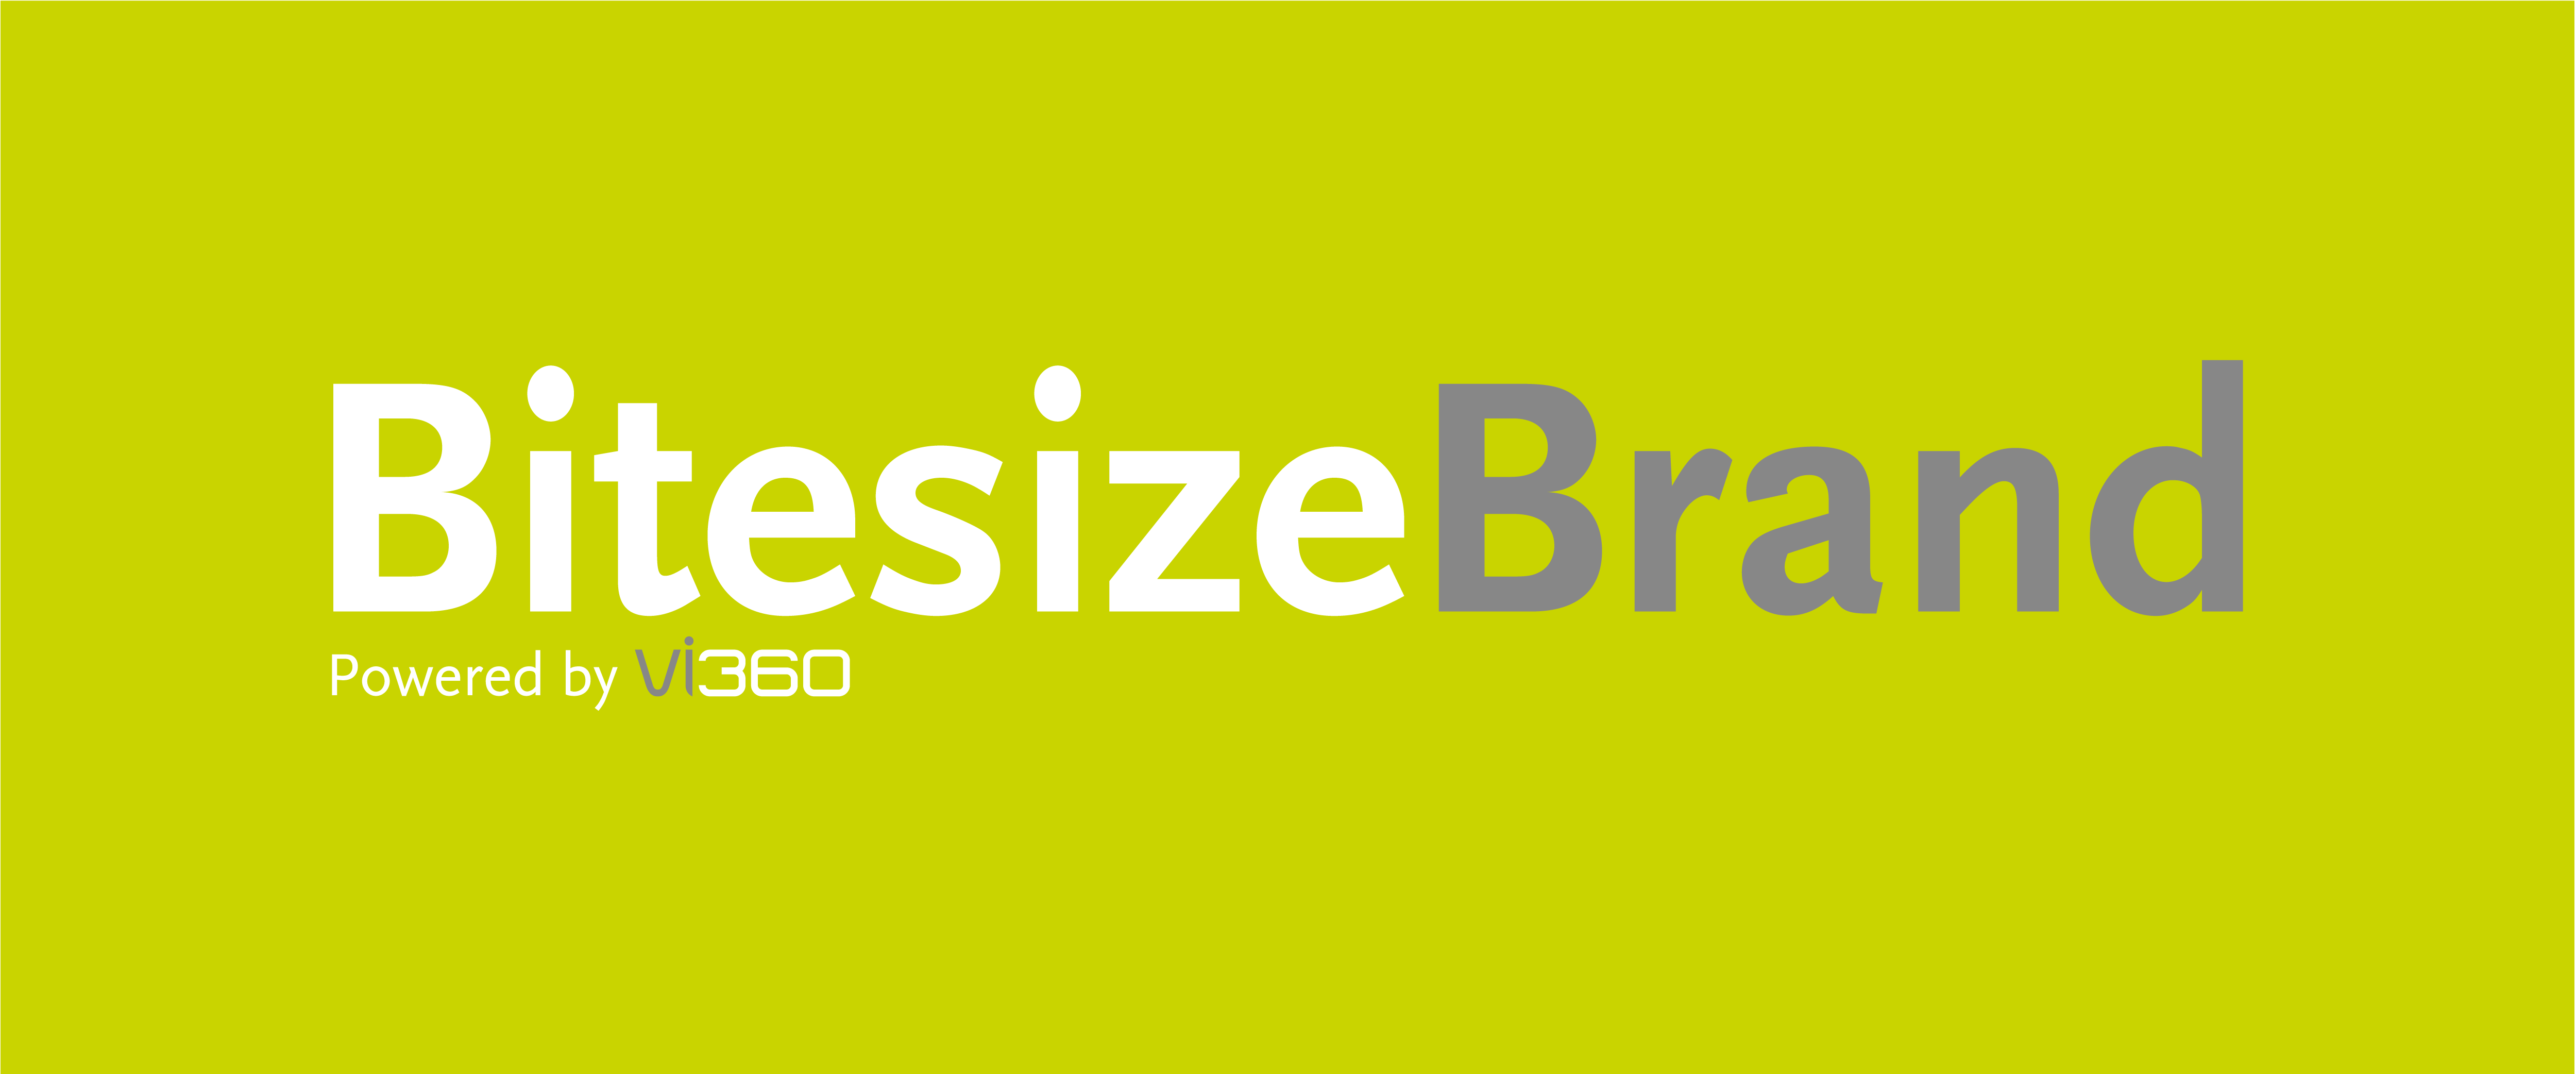 We’re curious about the ever-changing world of brands. Bitesize Brand provides quick and easy insights into some of the weird and wonderful stories from the UK and around the world.